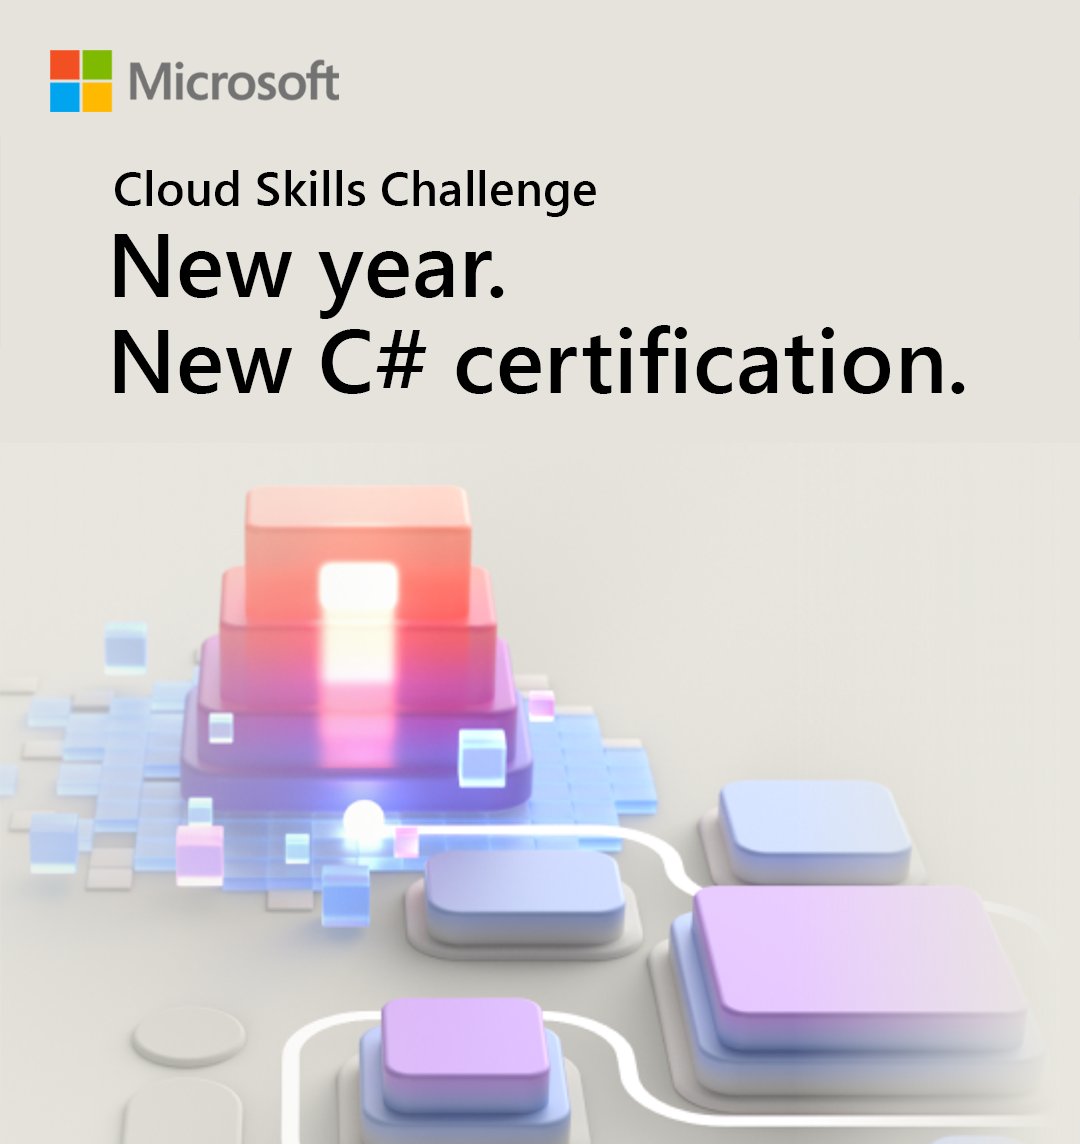 Get your C# certification in 2024. Join the #Csharp #CloudSkillsChallenge to complete curated #MicrosoftLearn content, get hands-on experience, and develop new skills. Kick-start your C# learning and get you closer to completing the C# certification
learn.microsoft.com/en-us/training…